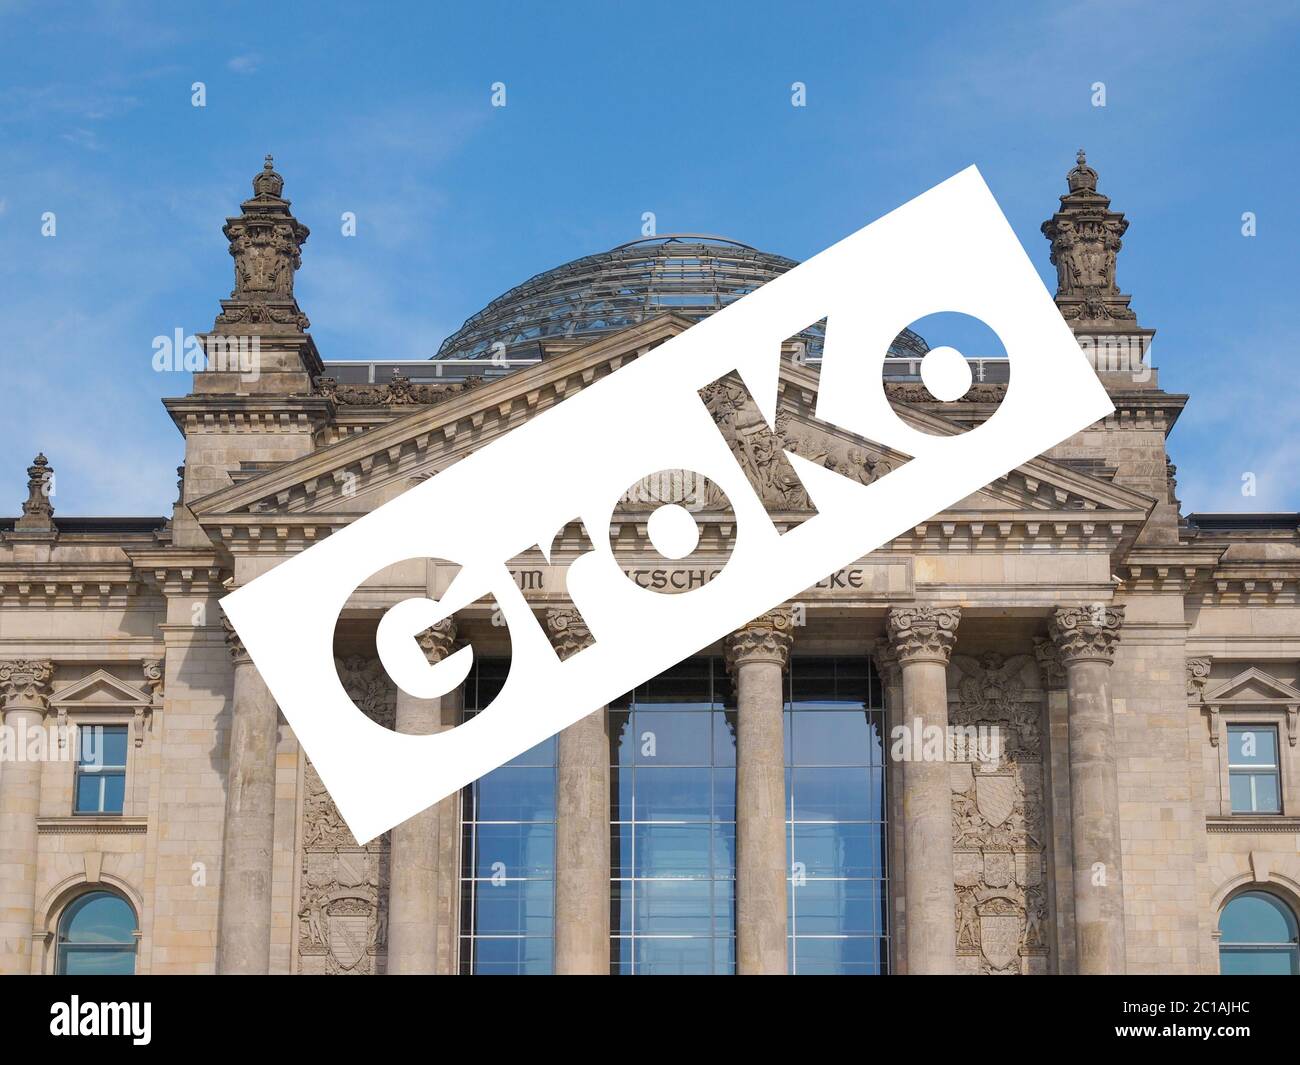 Groko (Grosse Koalition) over Reichstag parliament in Berlin Stock Photo